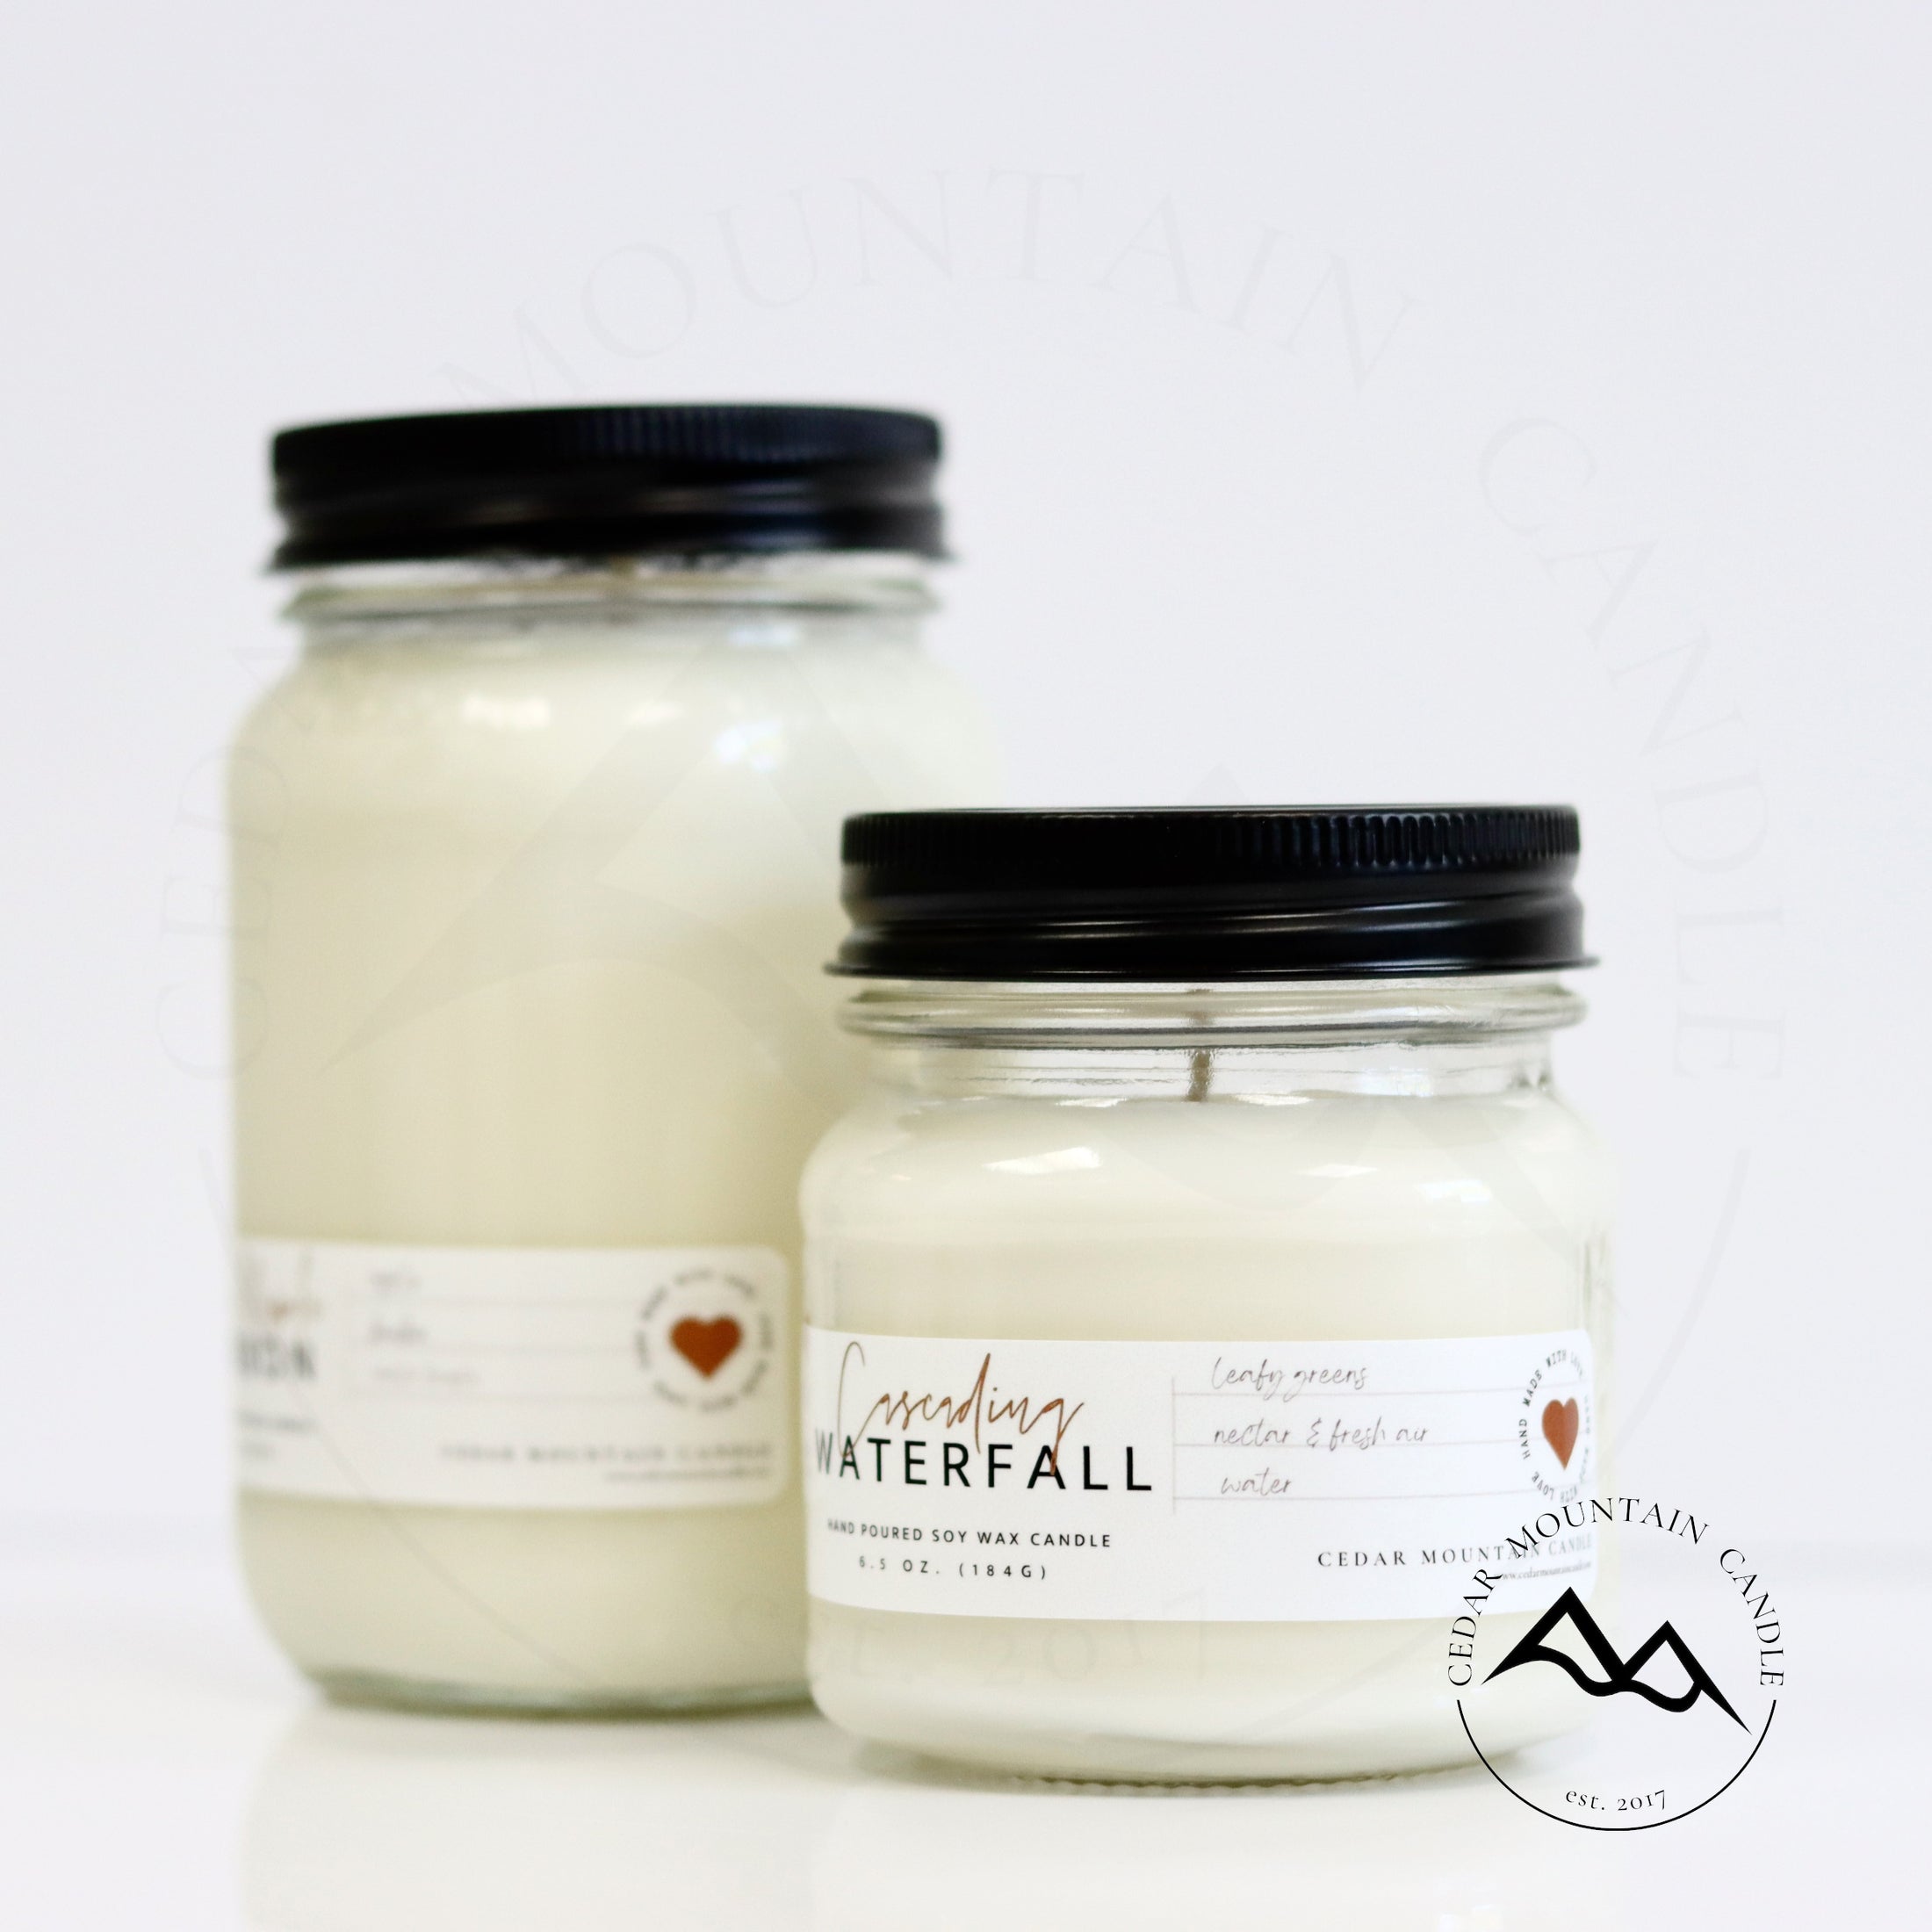 Cedar Mountain Candle clear mason jar soy candles made with natural ingredients